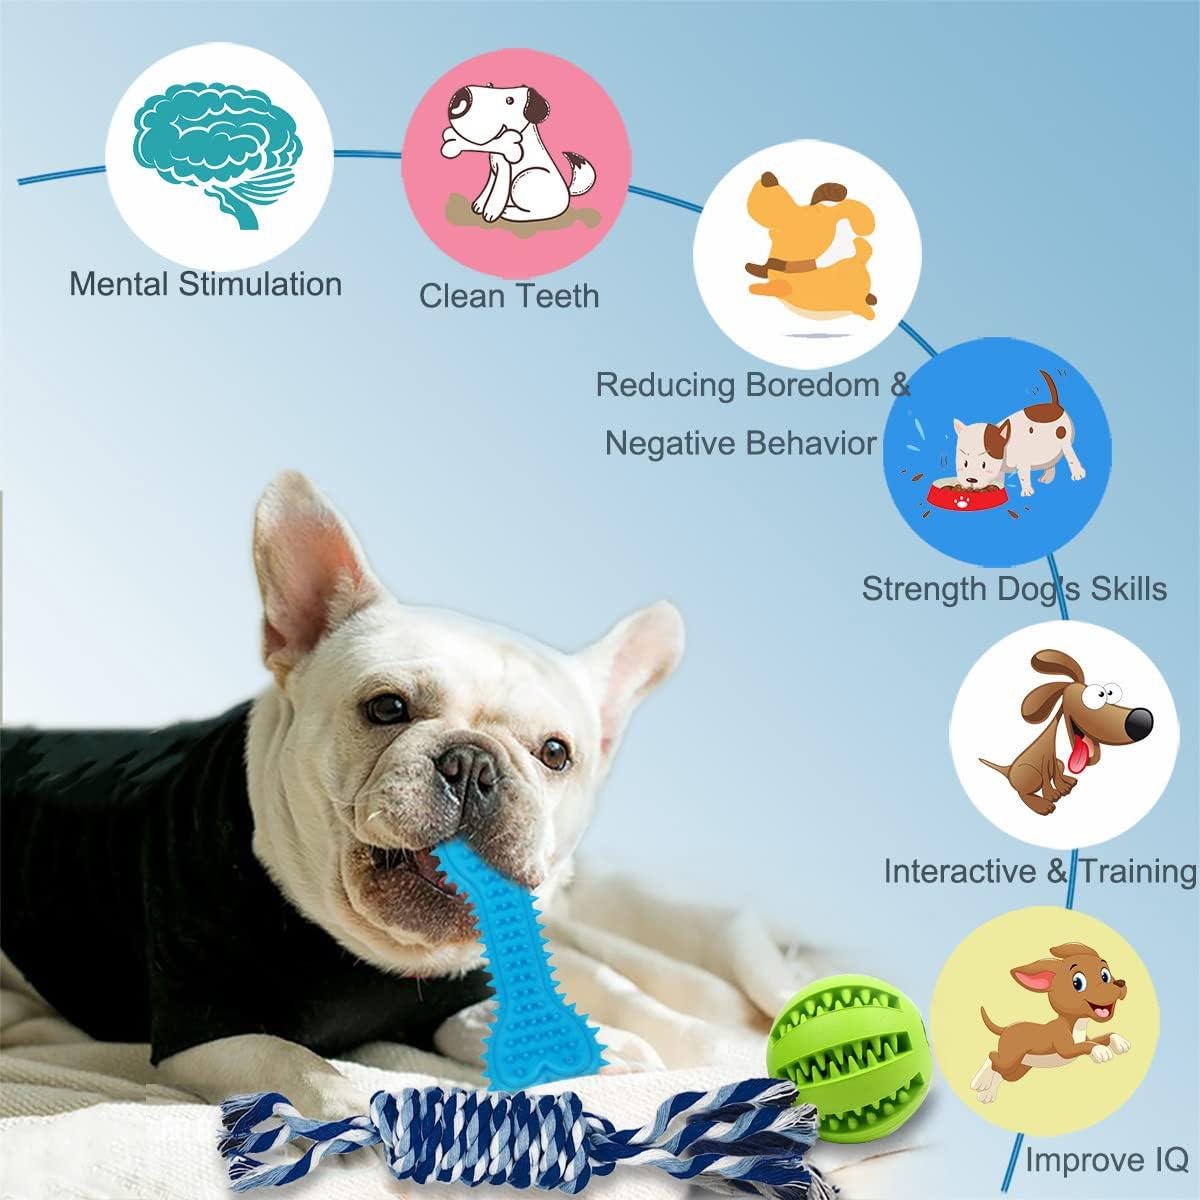 20 Pack Puppy Chew Toys - Dog Teething Toys for Puppies, Puppy Toys Toothbrush with Durable Ropes